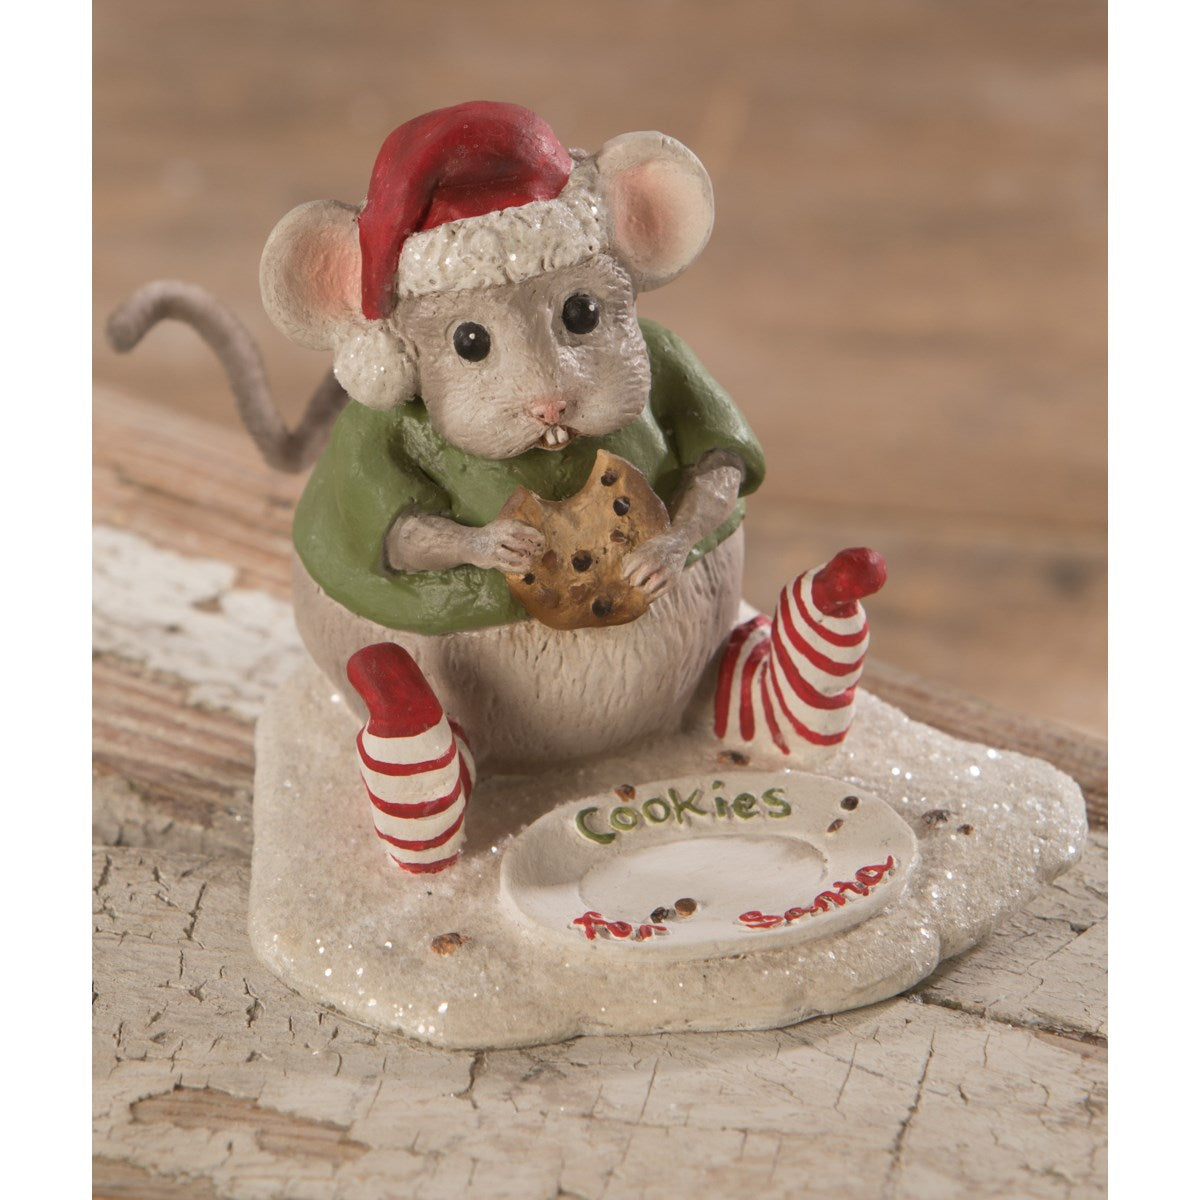 Nibbles Mouse with Cookie for Santa Figurine